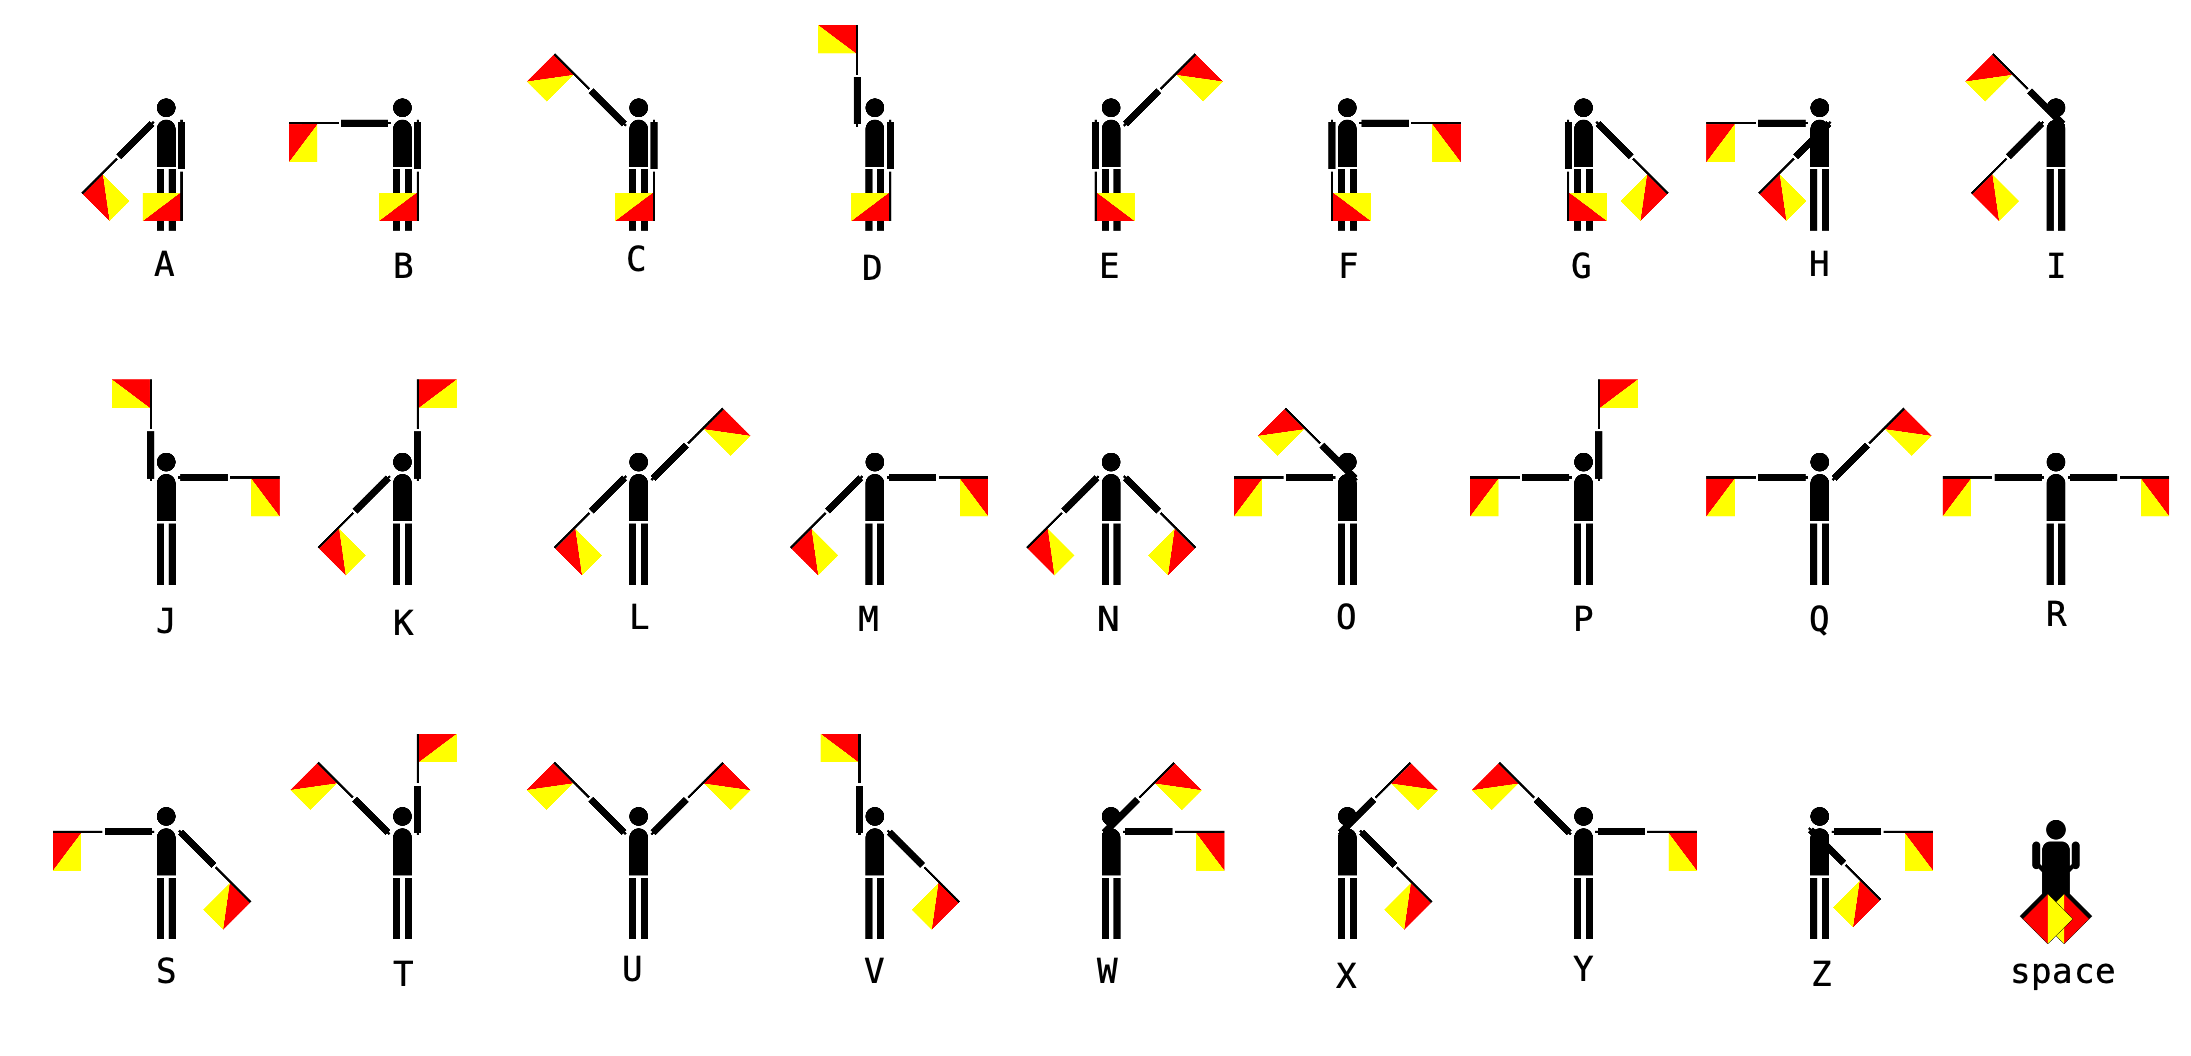 Twenty seven flag positions, one for each of the letters from A to Z and one for a space, as given in the table.